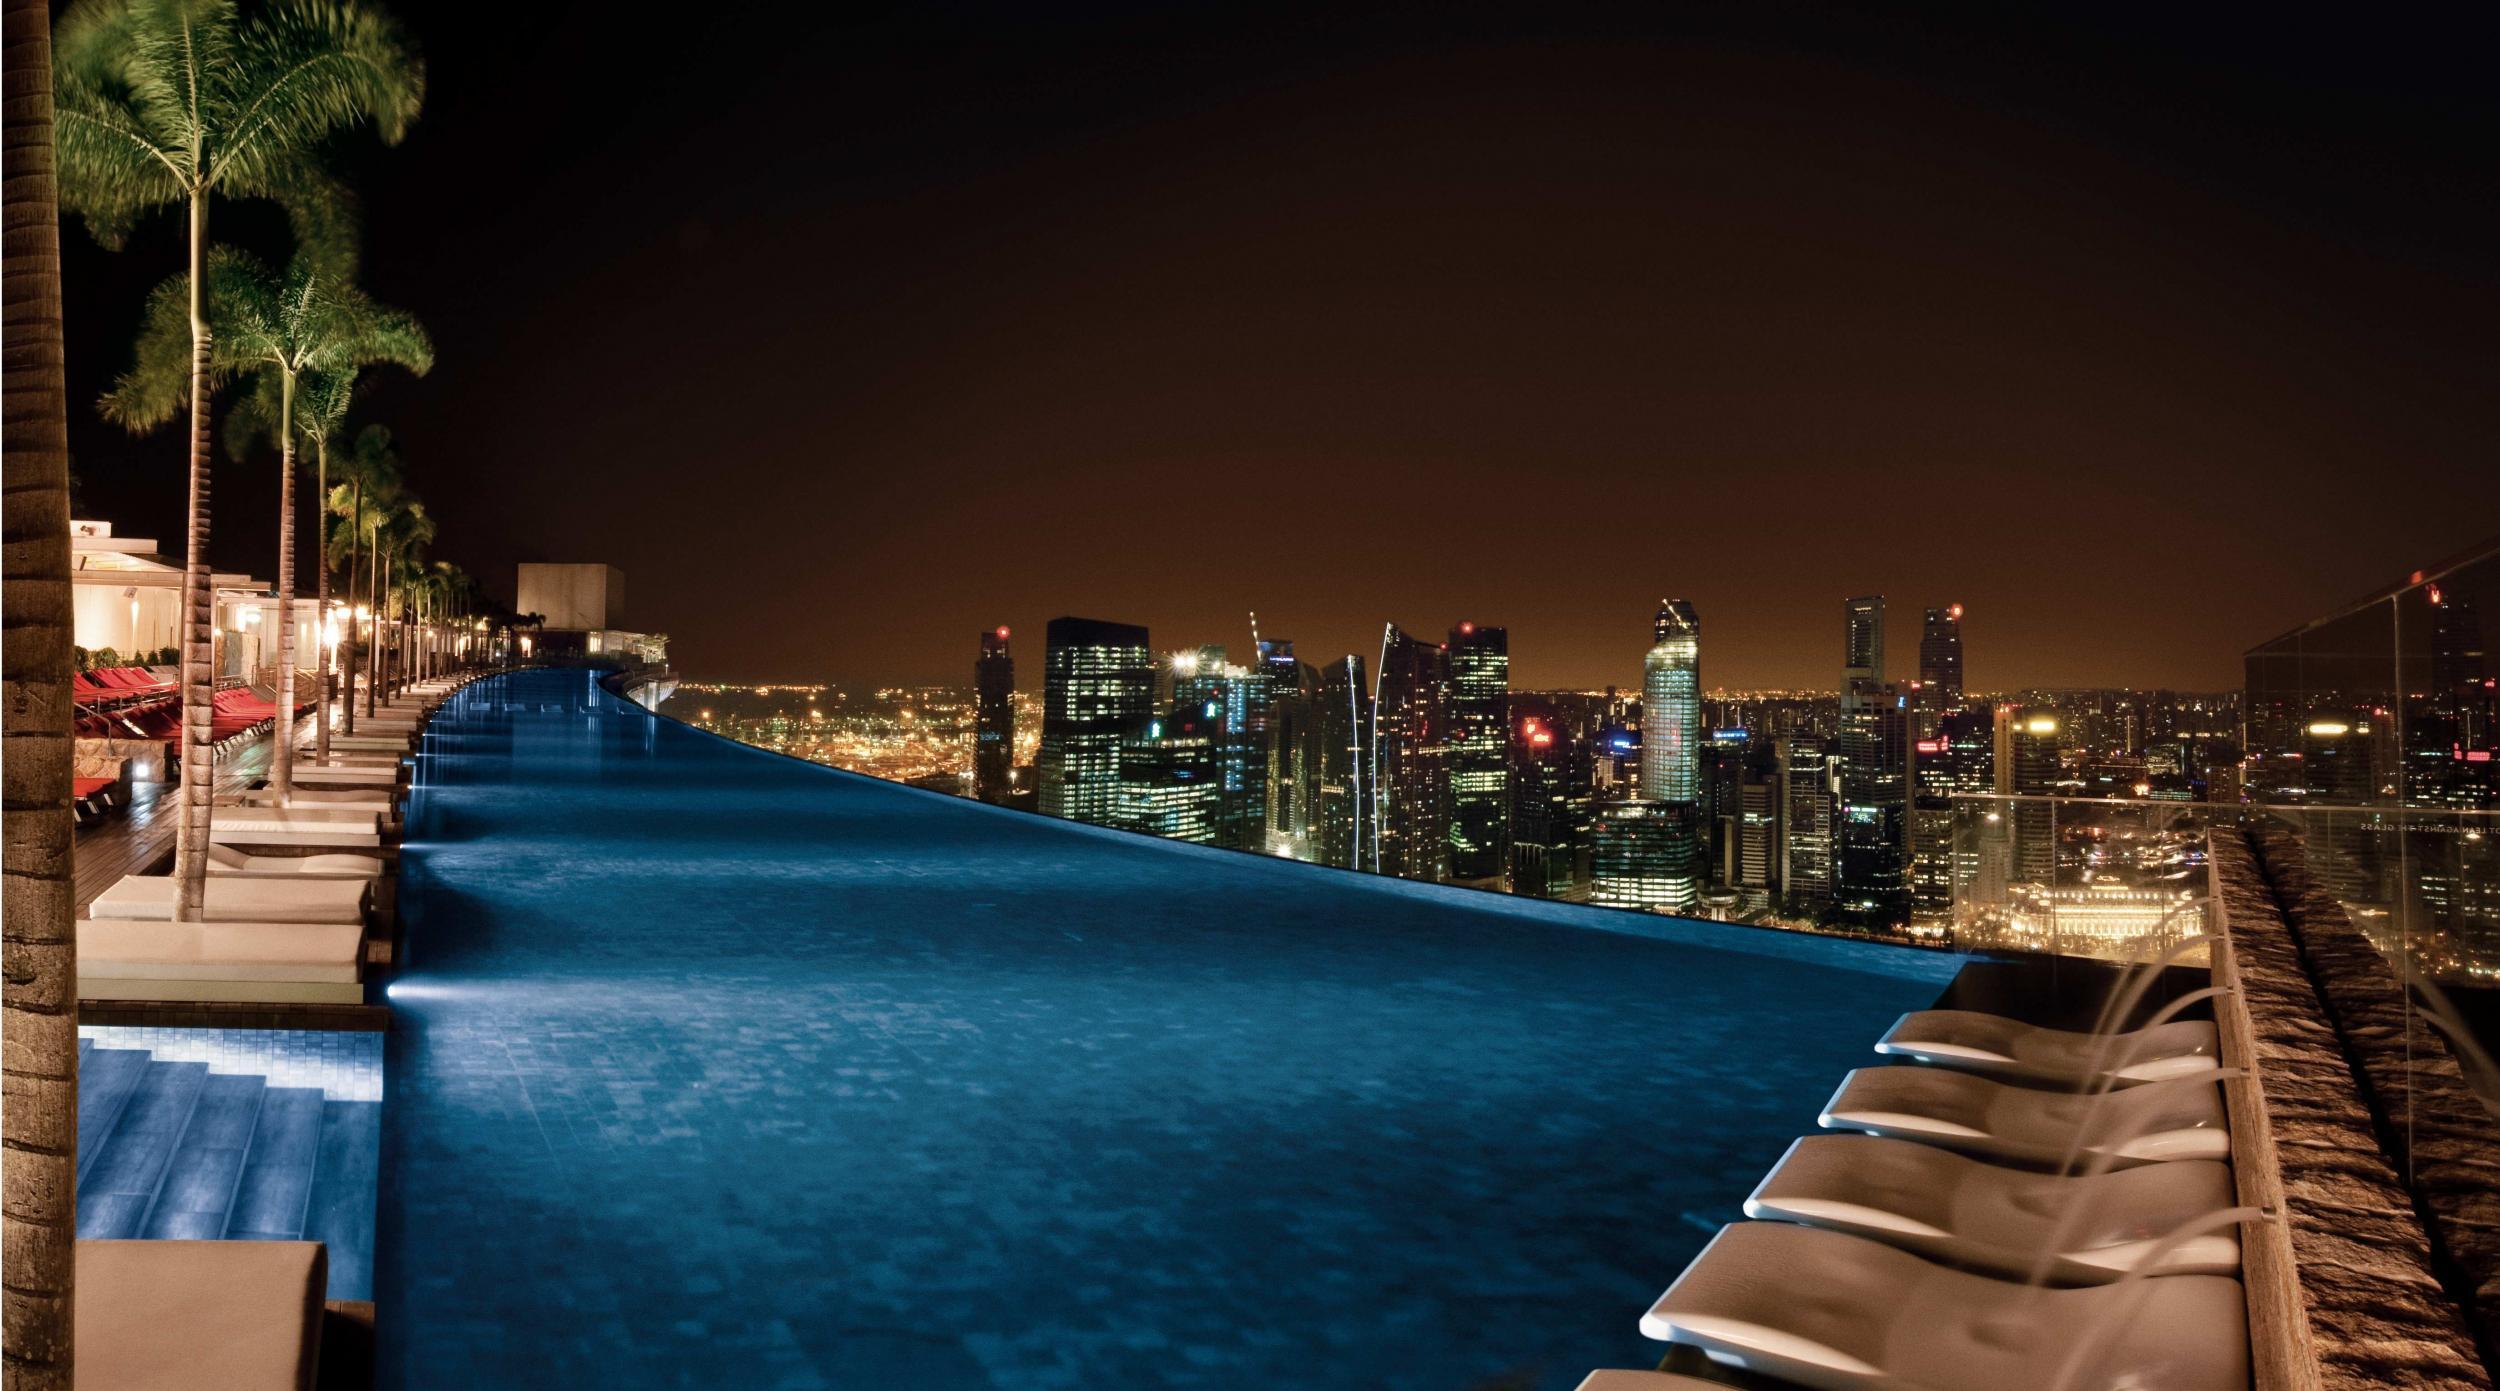 Marina Bay Sands sets the standard for city infinity pools